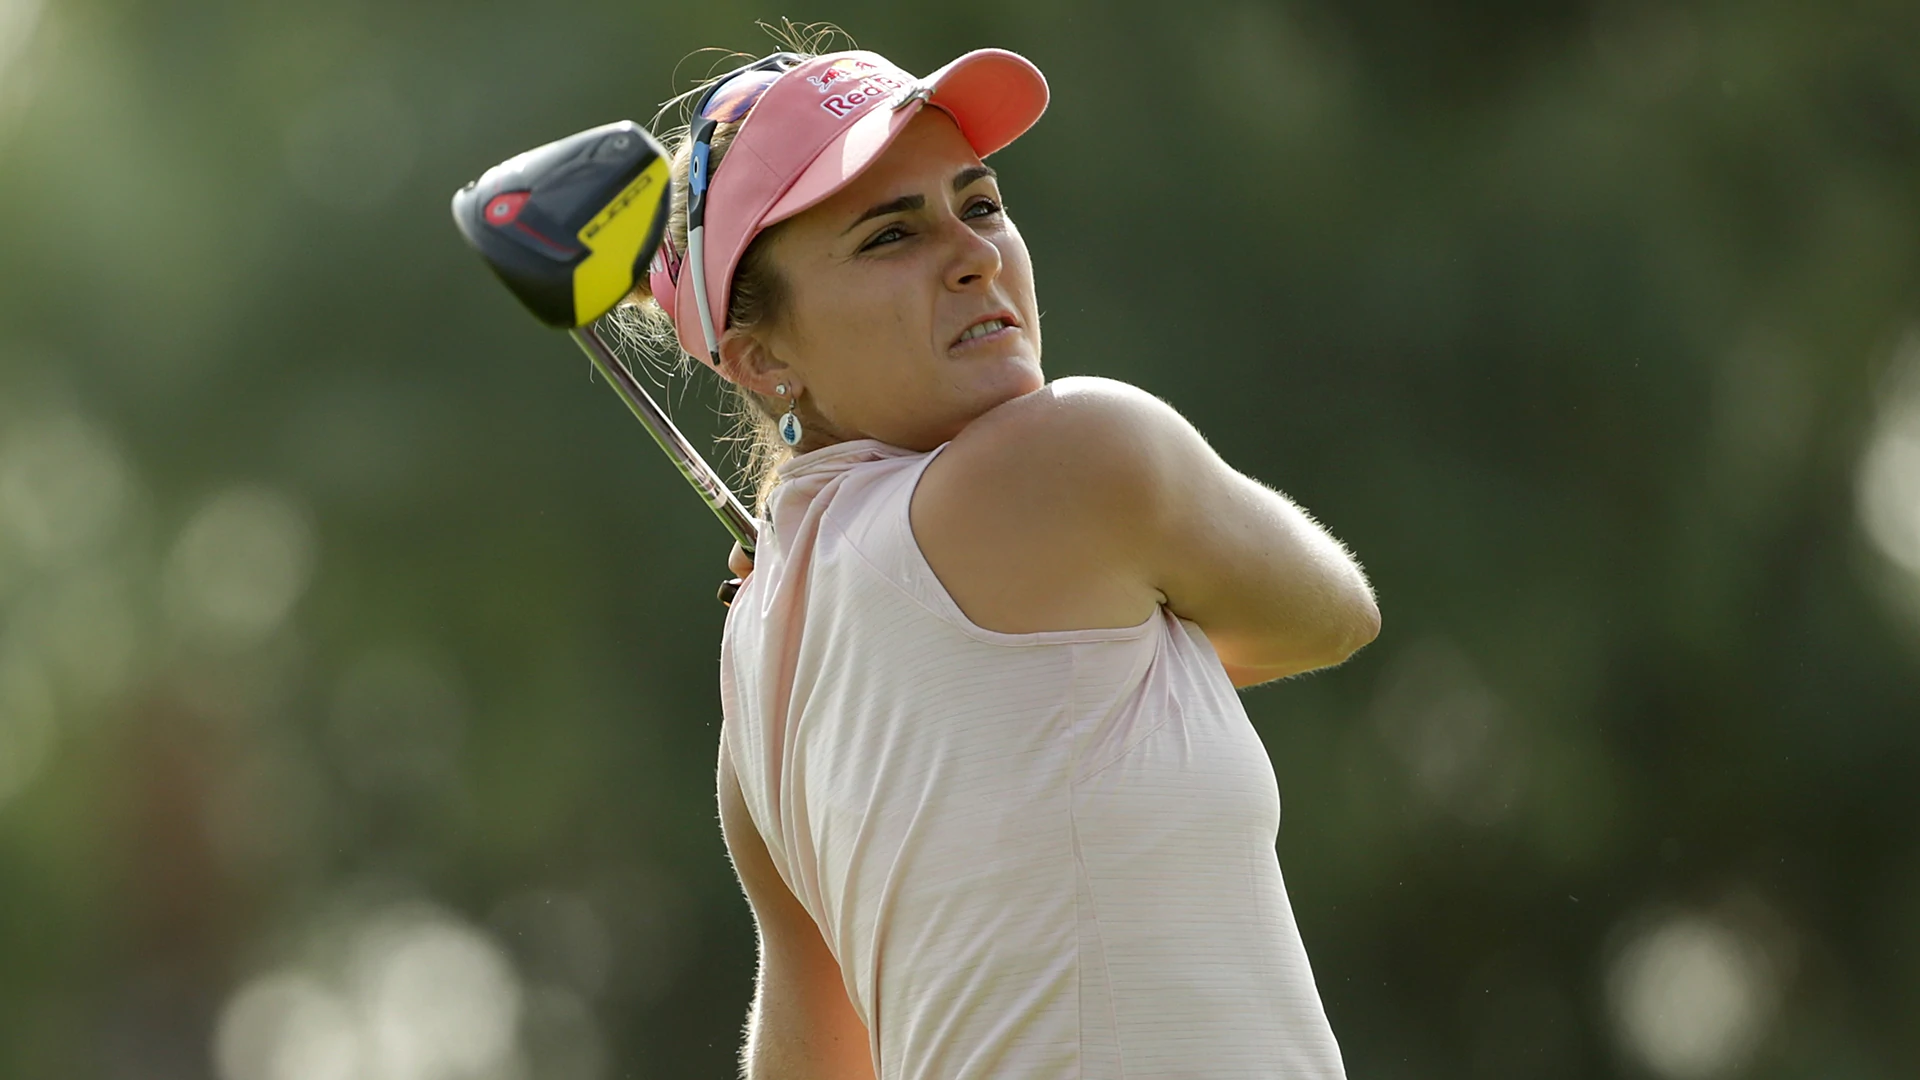 New Putting Grip Among Changes for Lexi Thompson (70) at ANA Inspiration